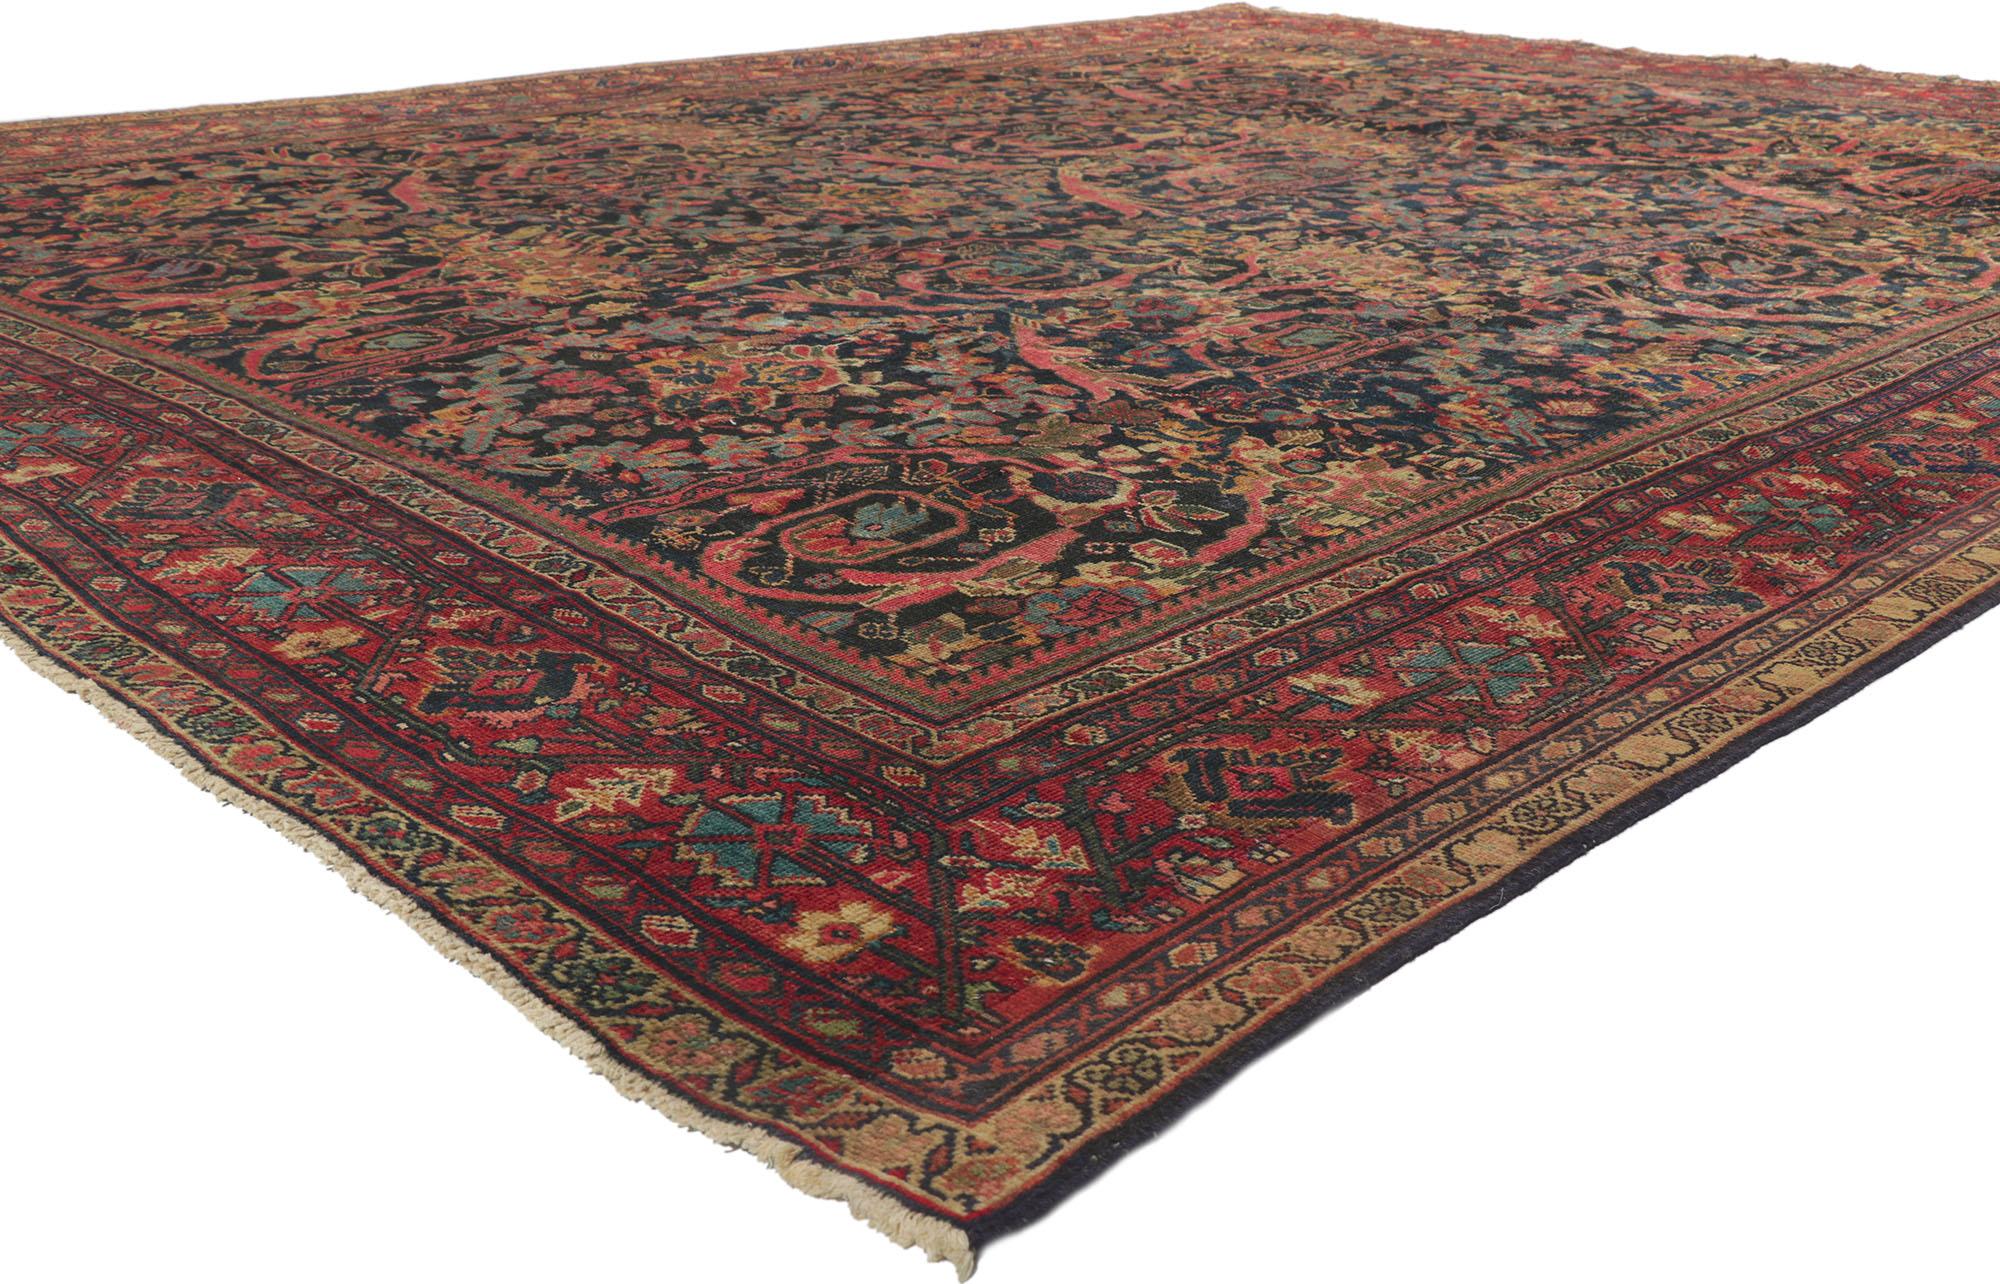 78156 Distressed Antique Persian Mahal rug, 10'06 x 13'04. Timeless elegance and effortless beauty, this hand-knotted wool antique Persian Mahal rug is poised to impress. The lovingly time-worn navy blue composition is covered with a traditional